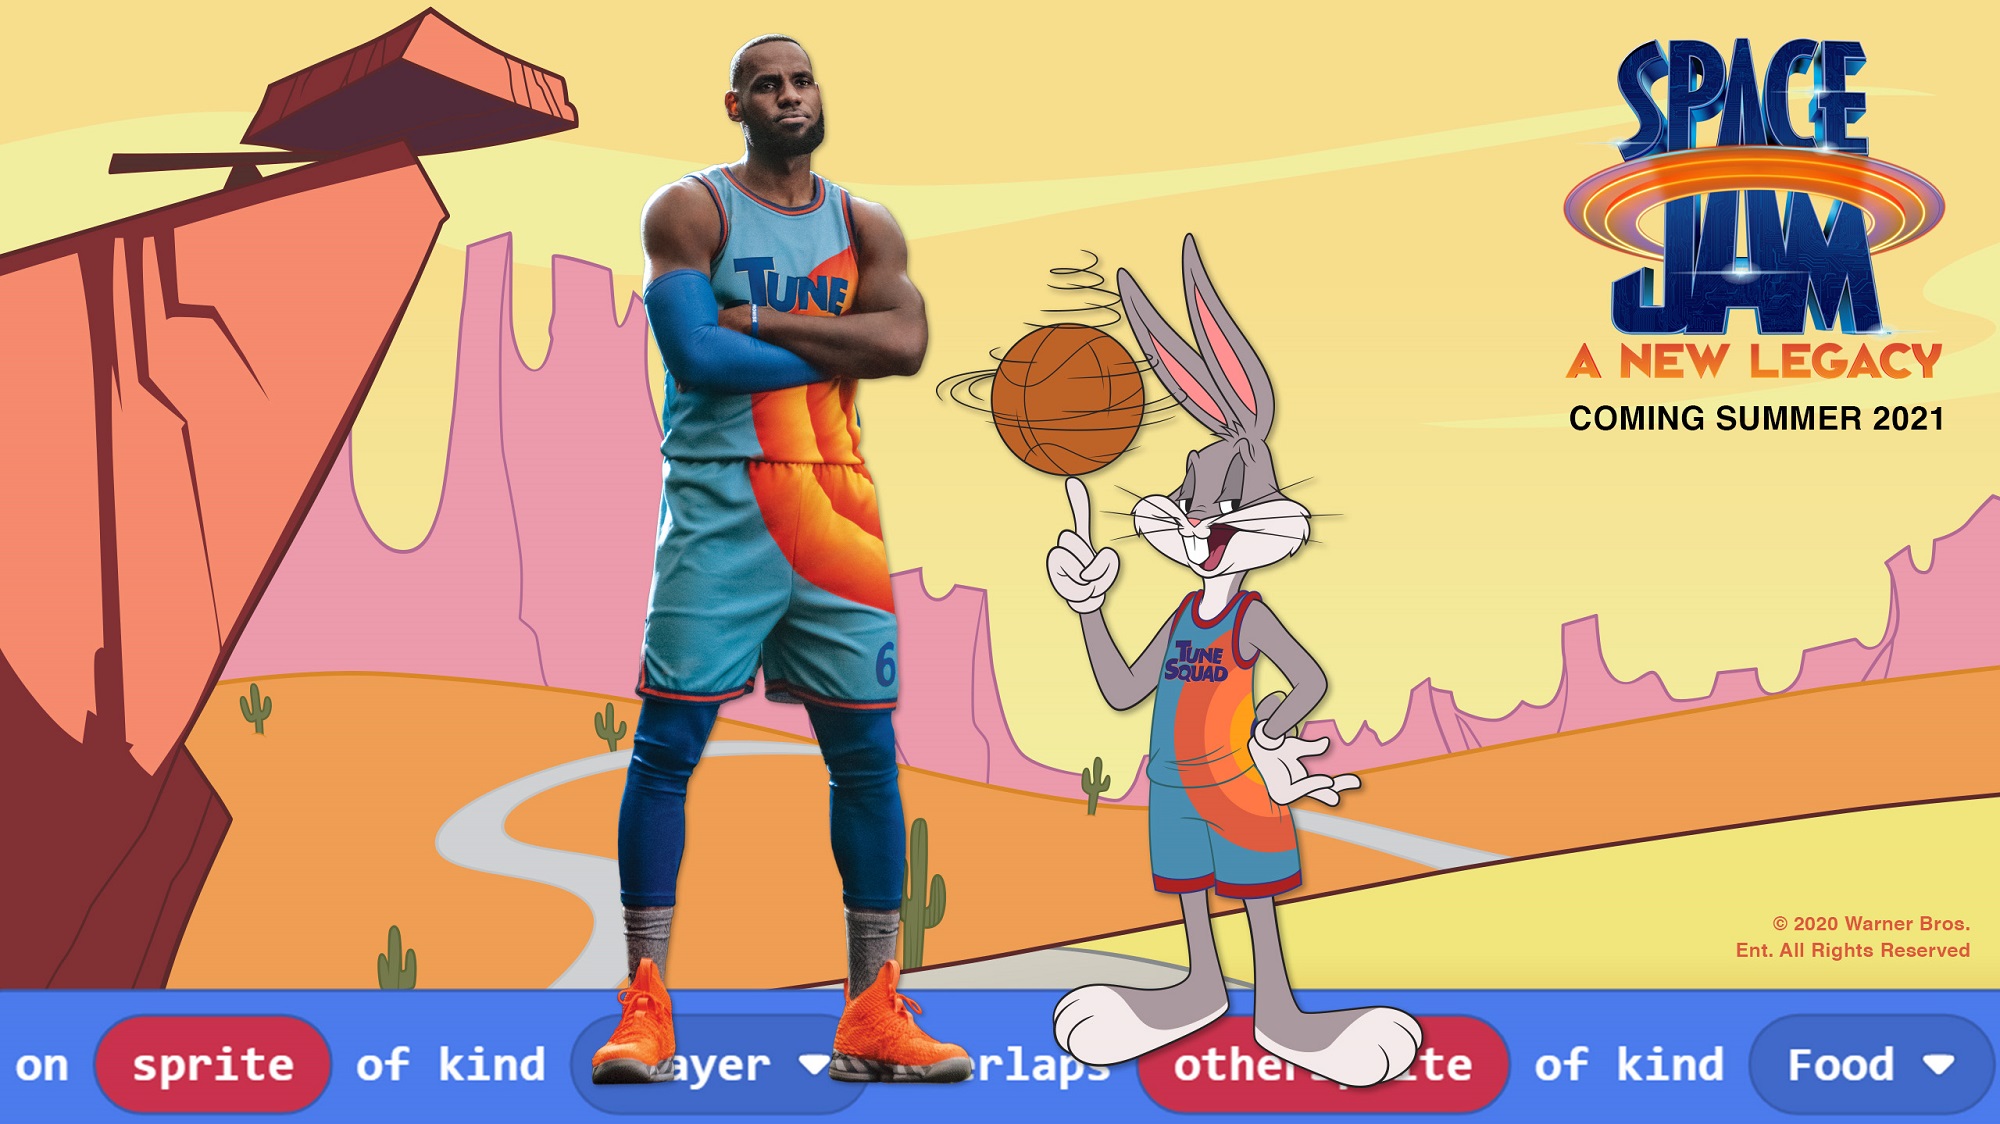 Space Jam 2' Title Revealed by LeBron James